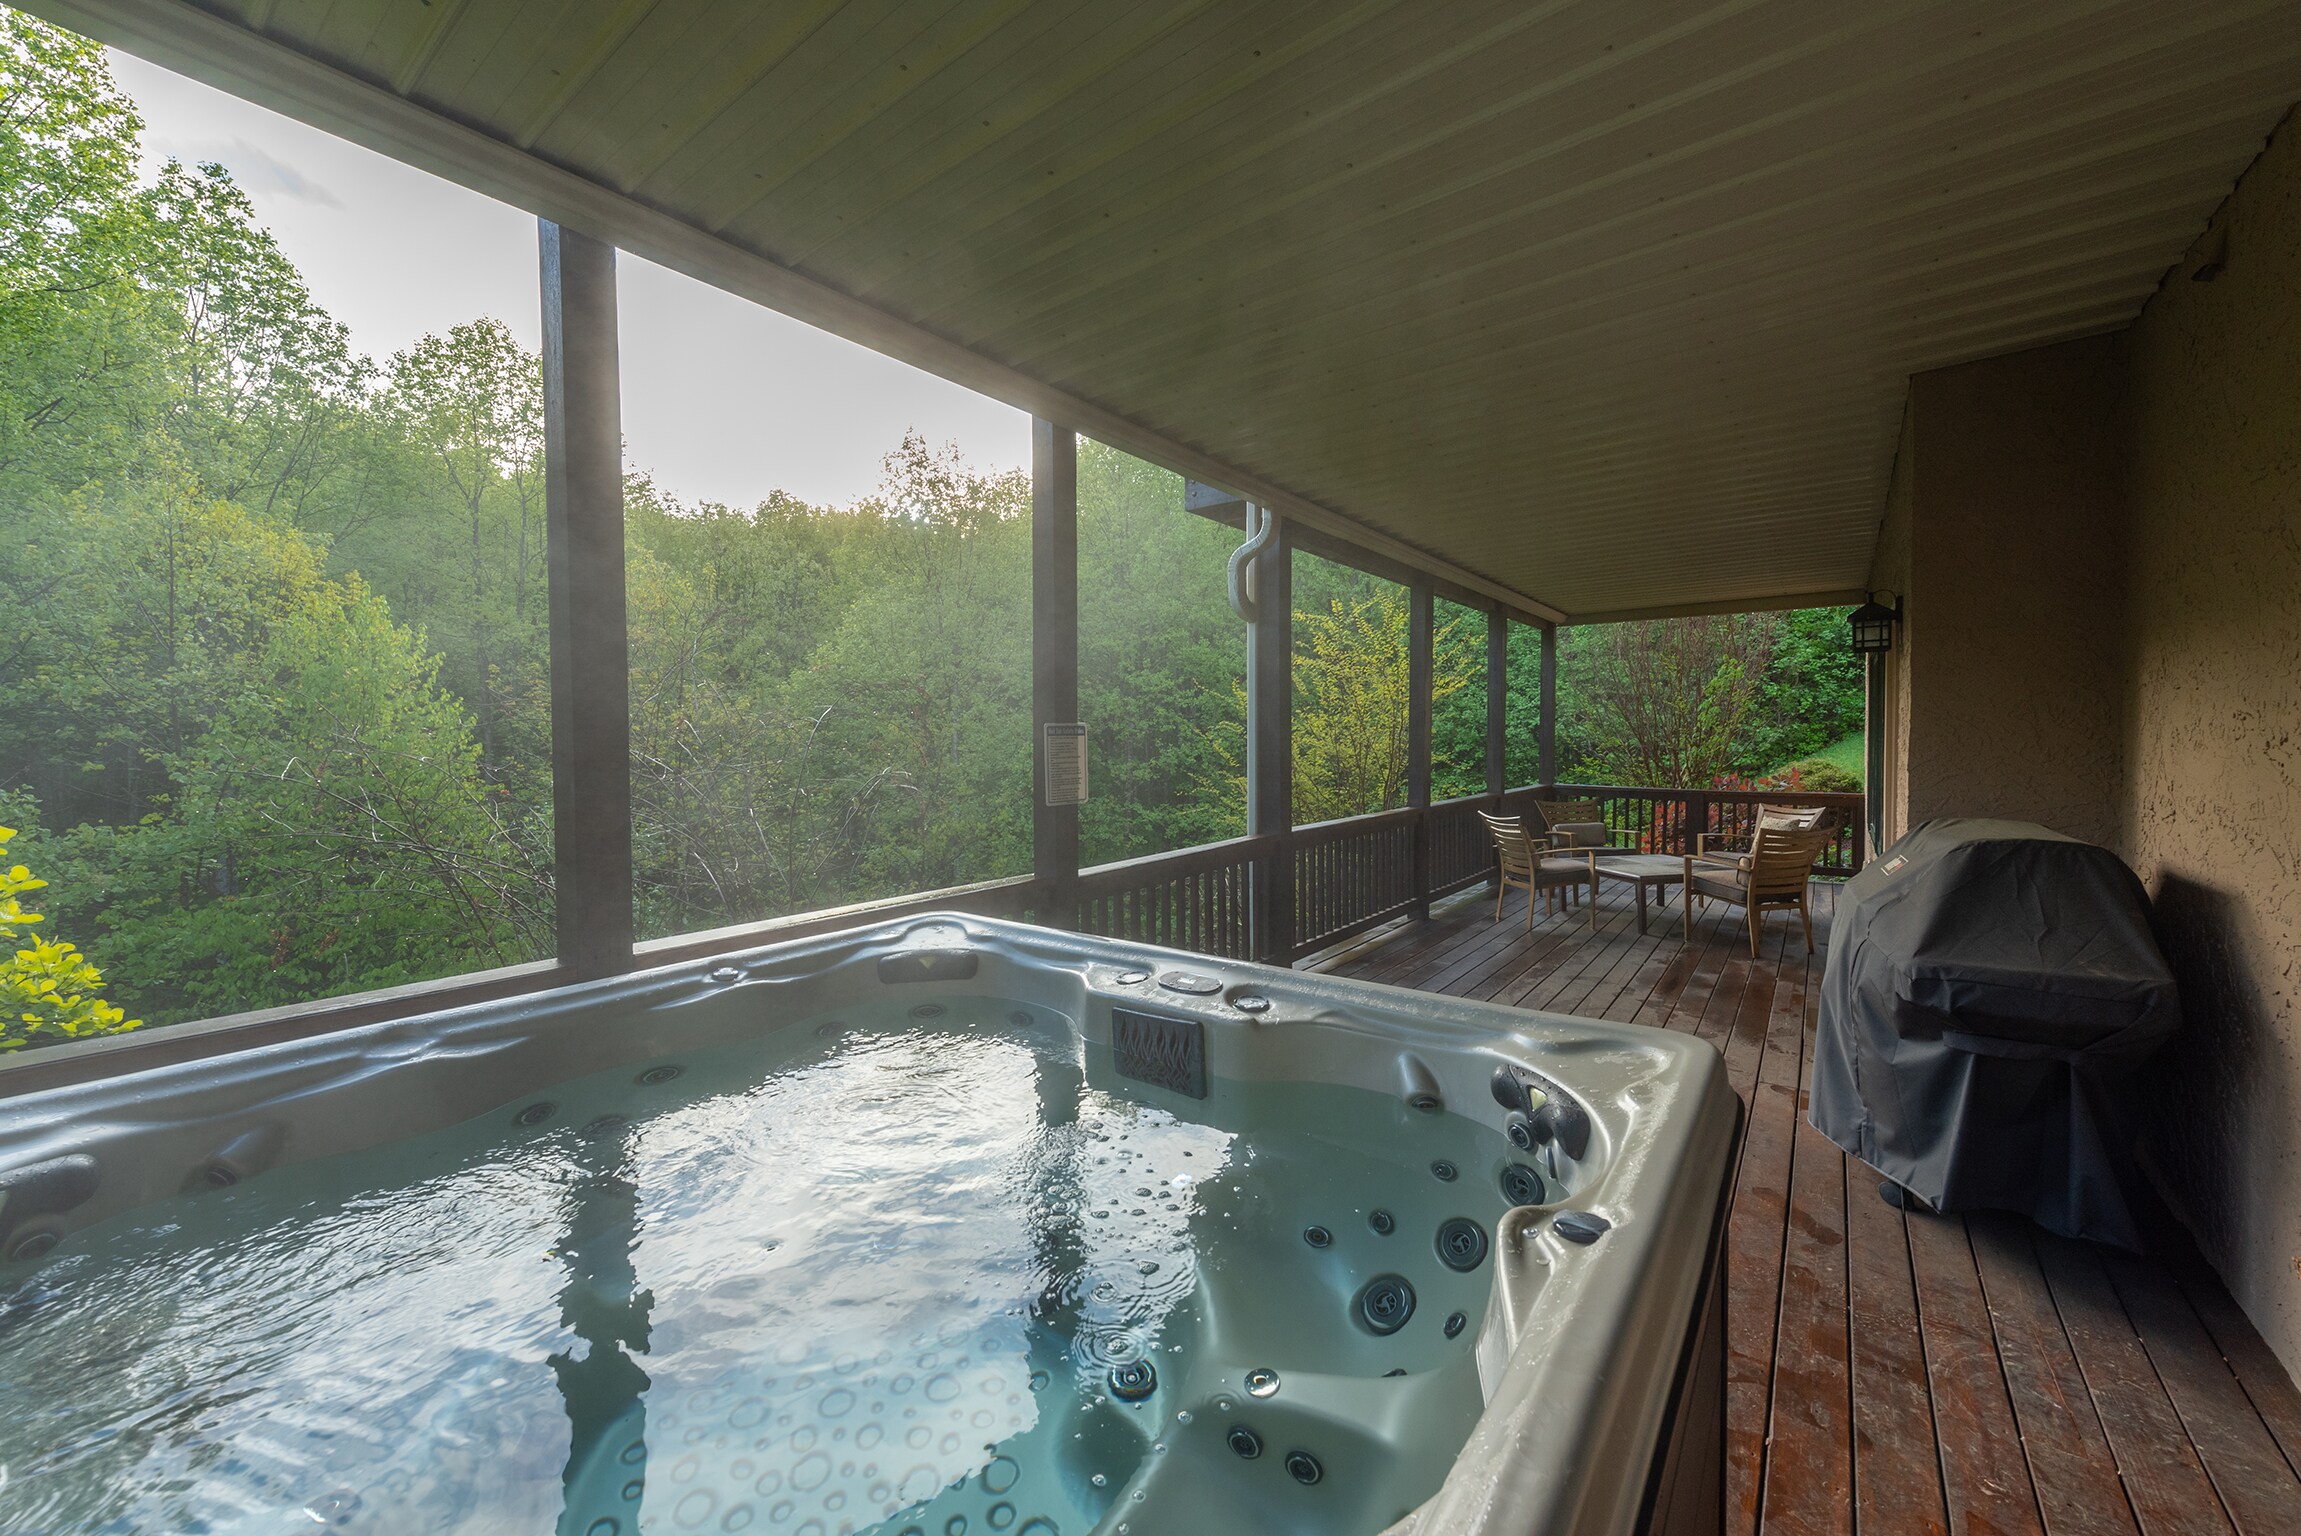 The lower deck offers a gas grill & 8-person hot tub to enjoy.